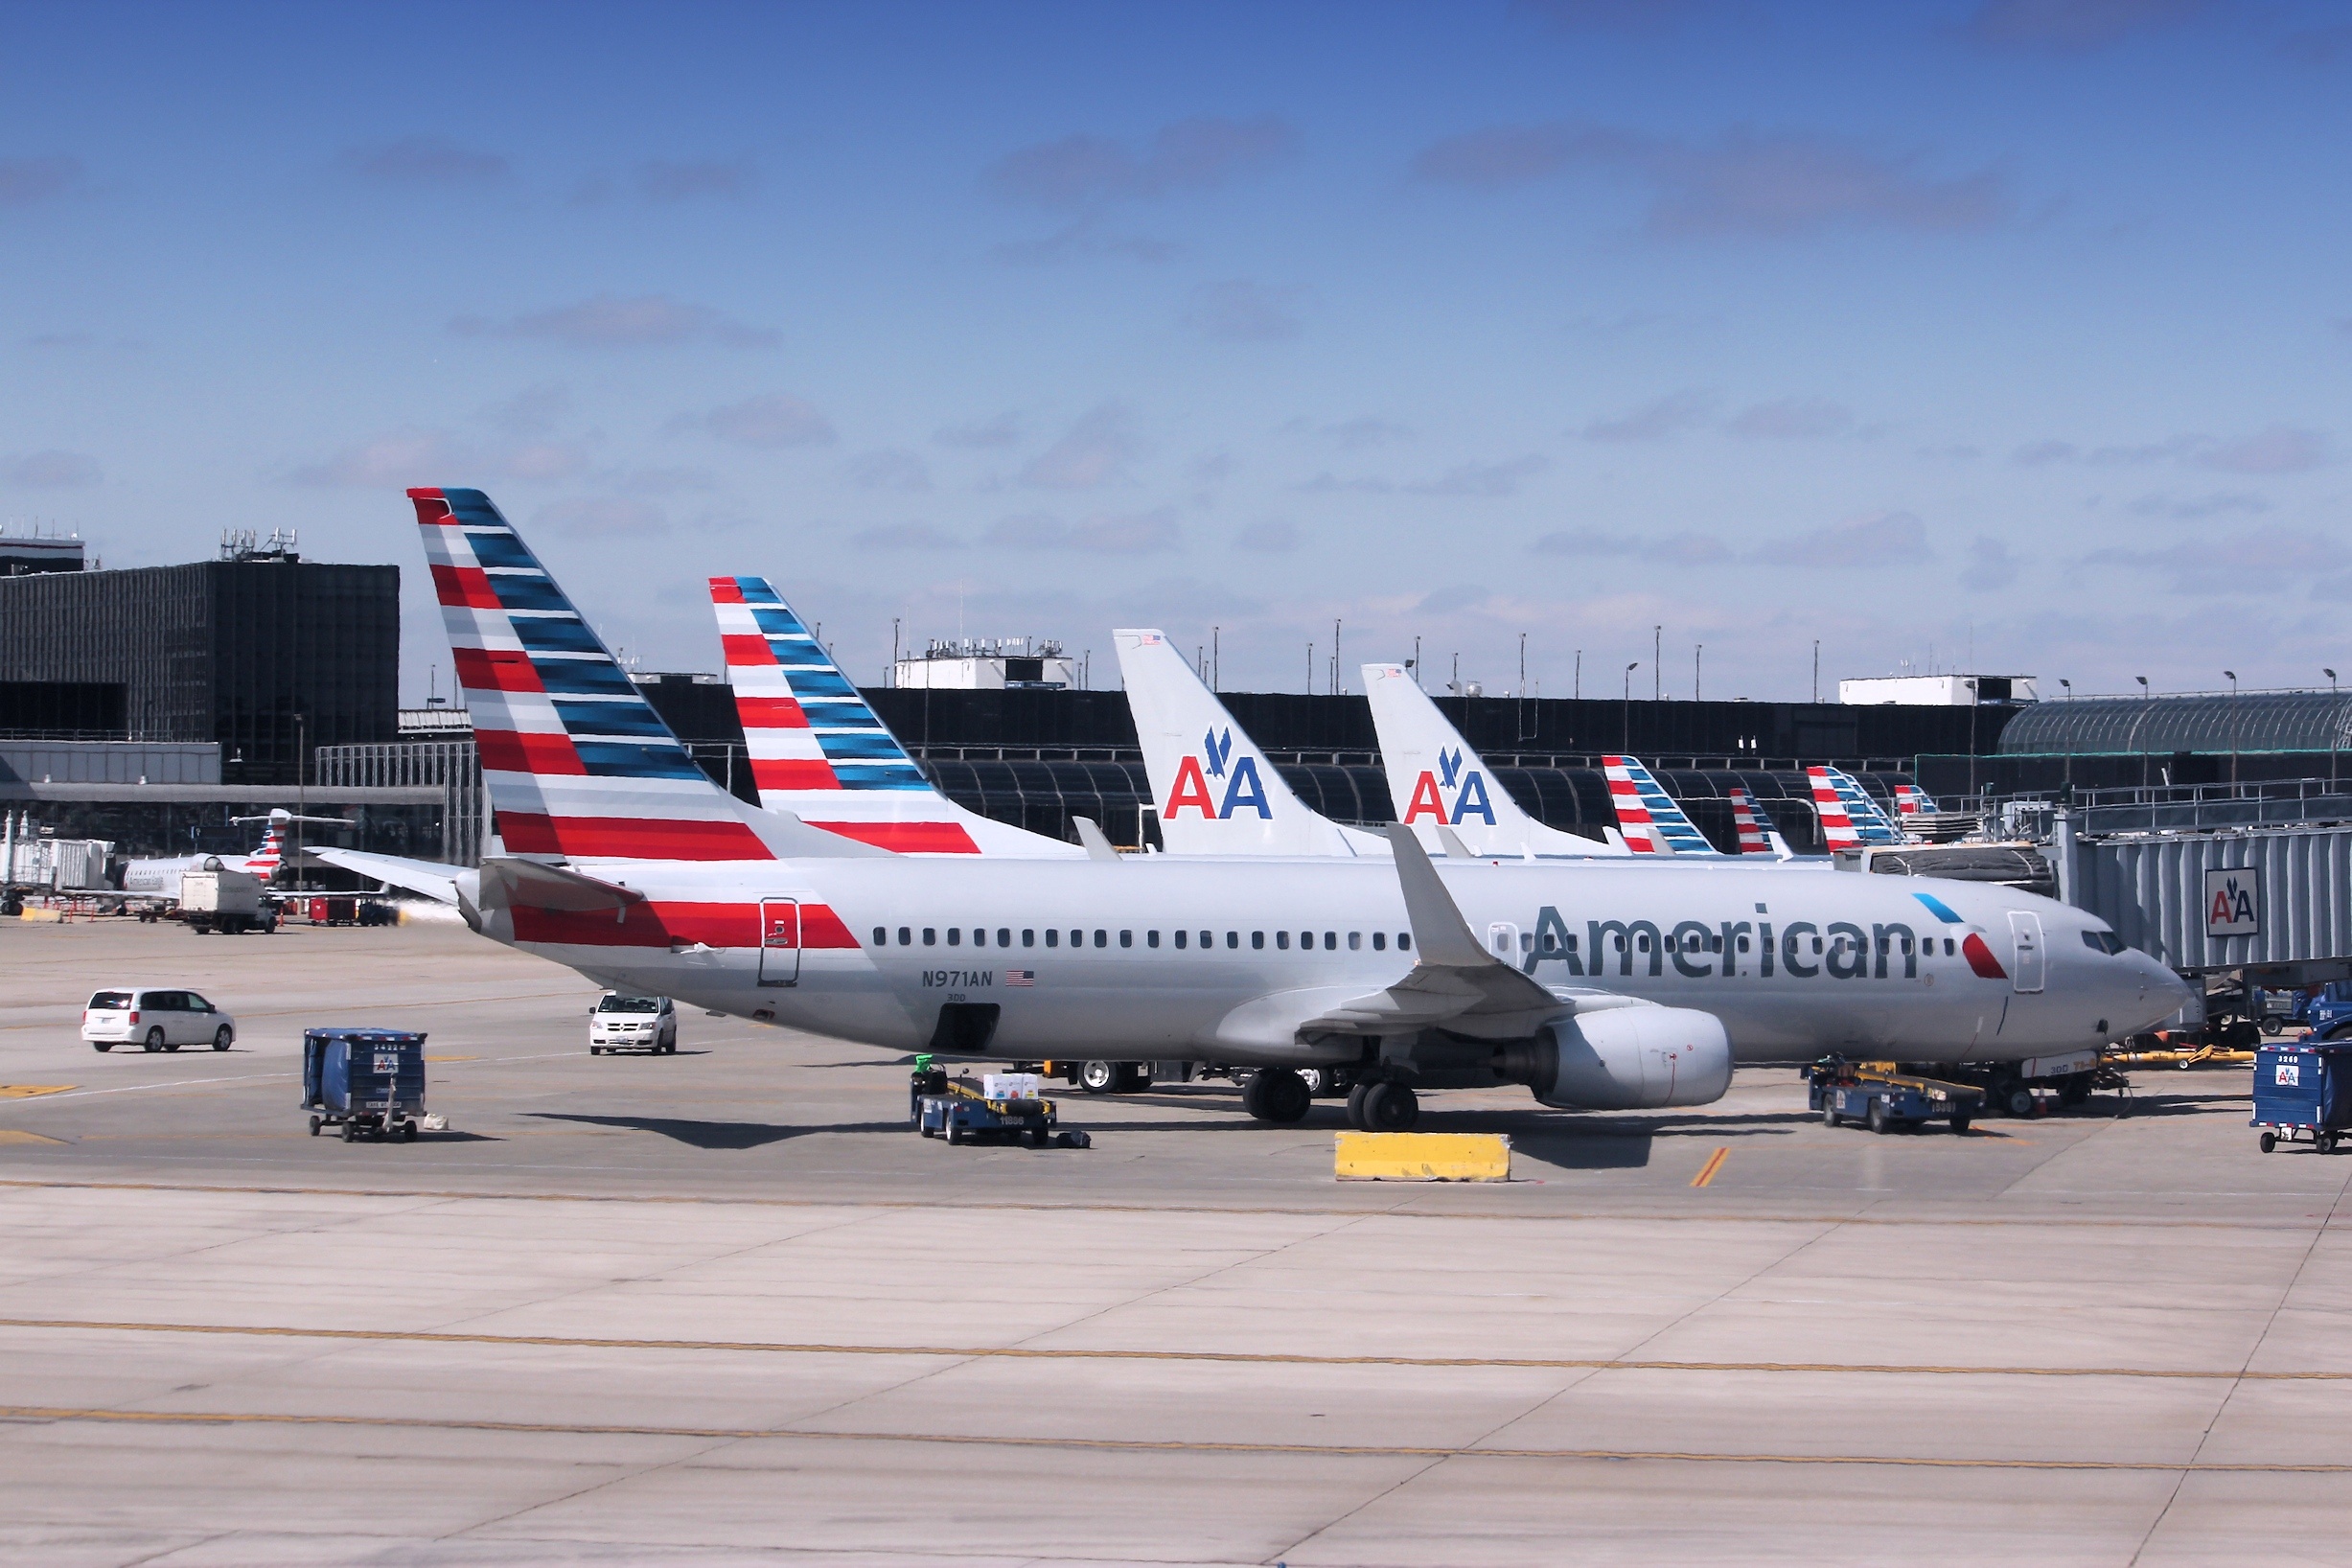 American Airlines Blinks on NDCs, As Sales and Stock Fall